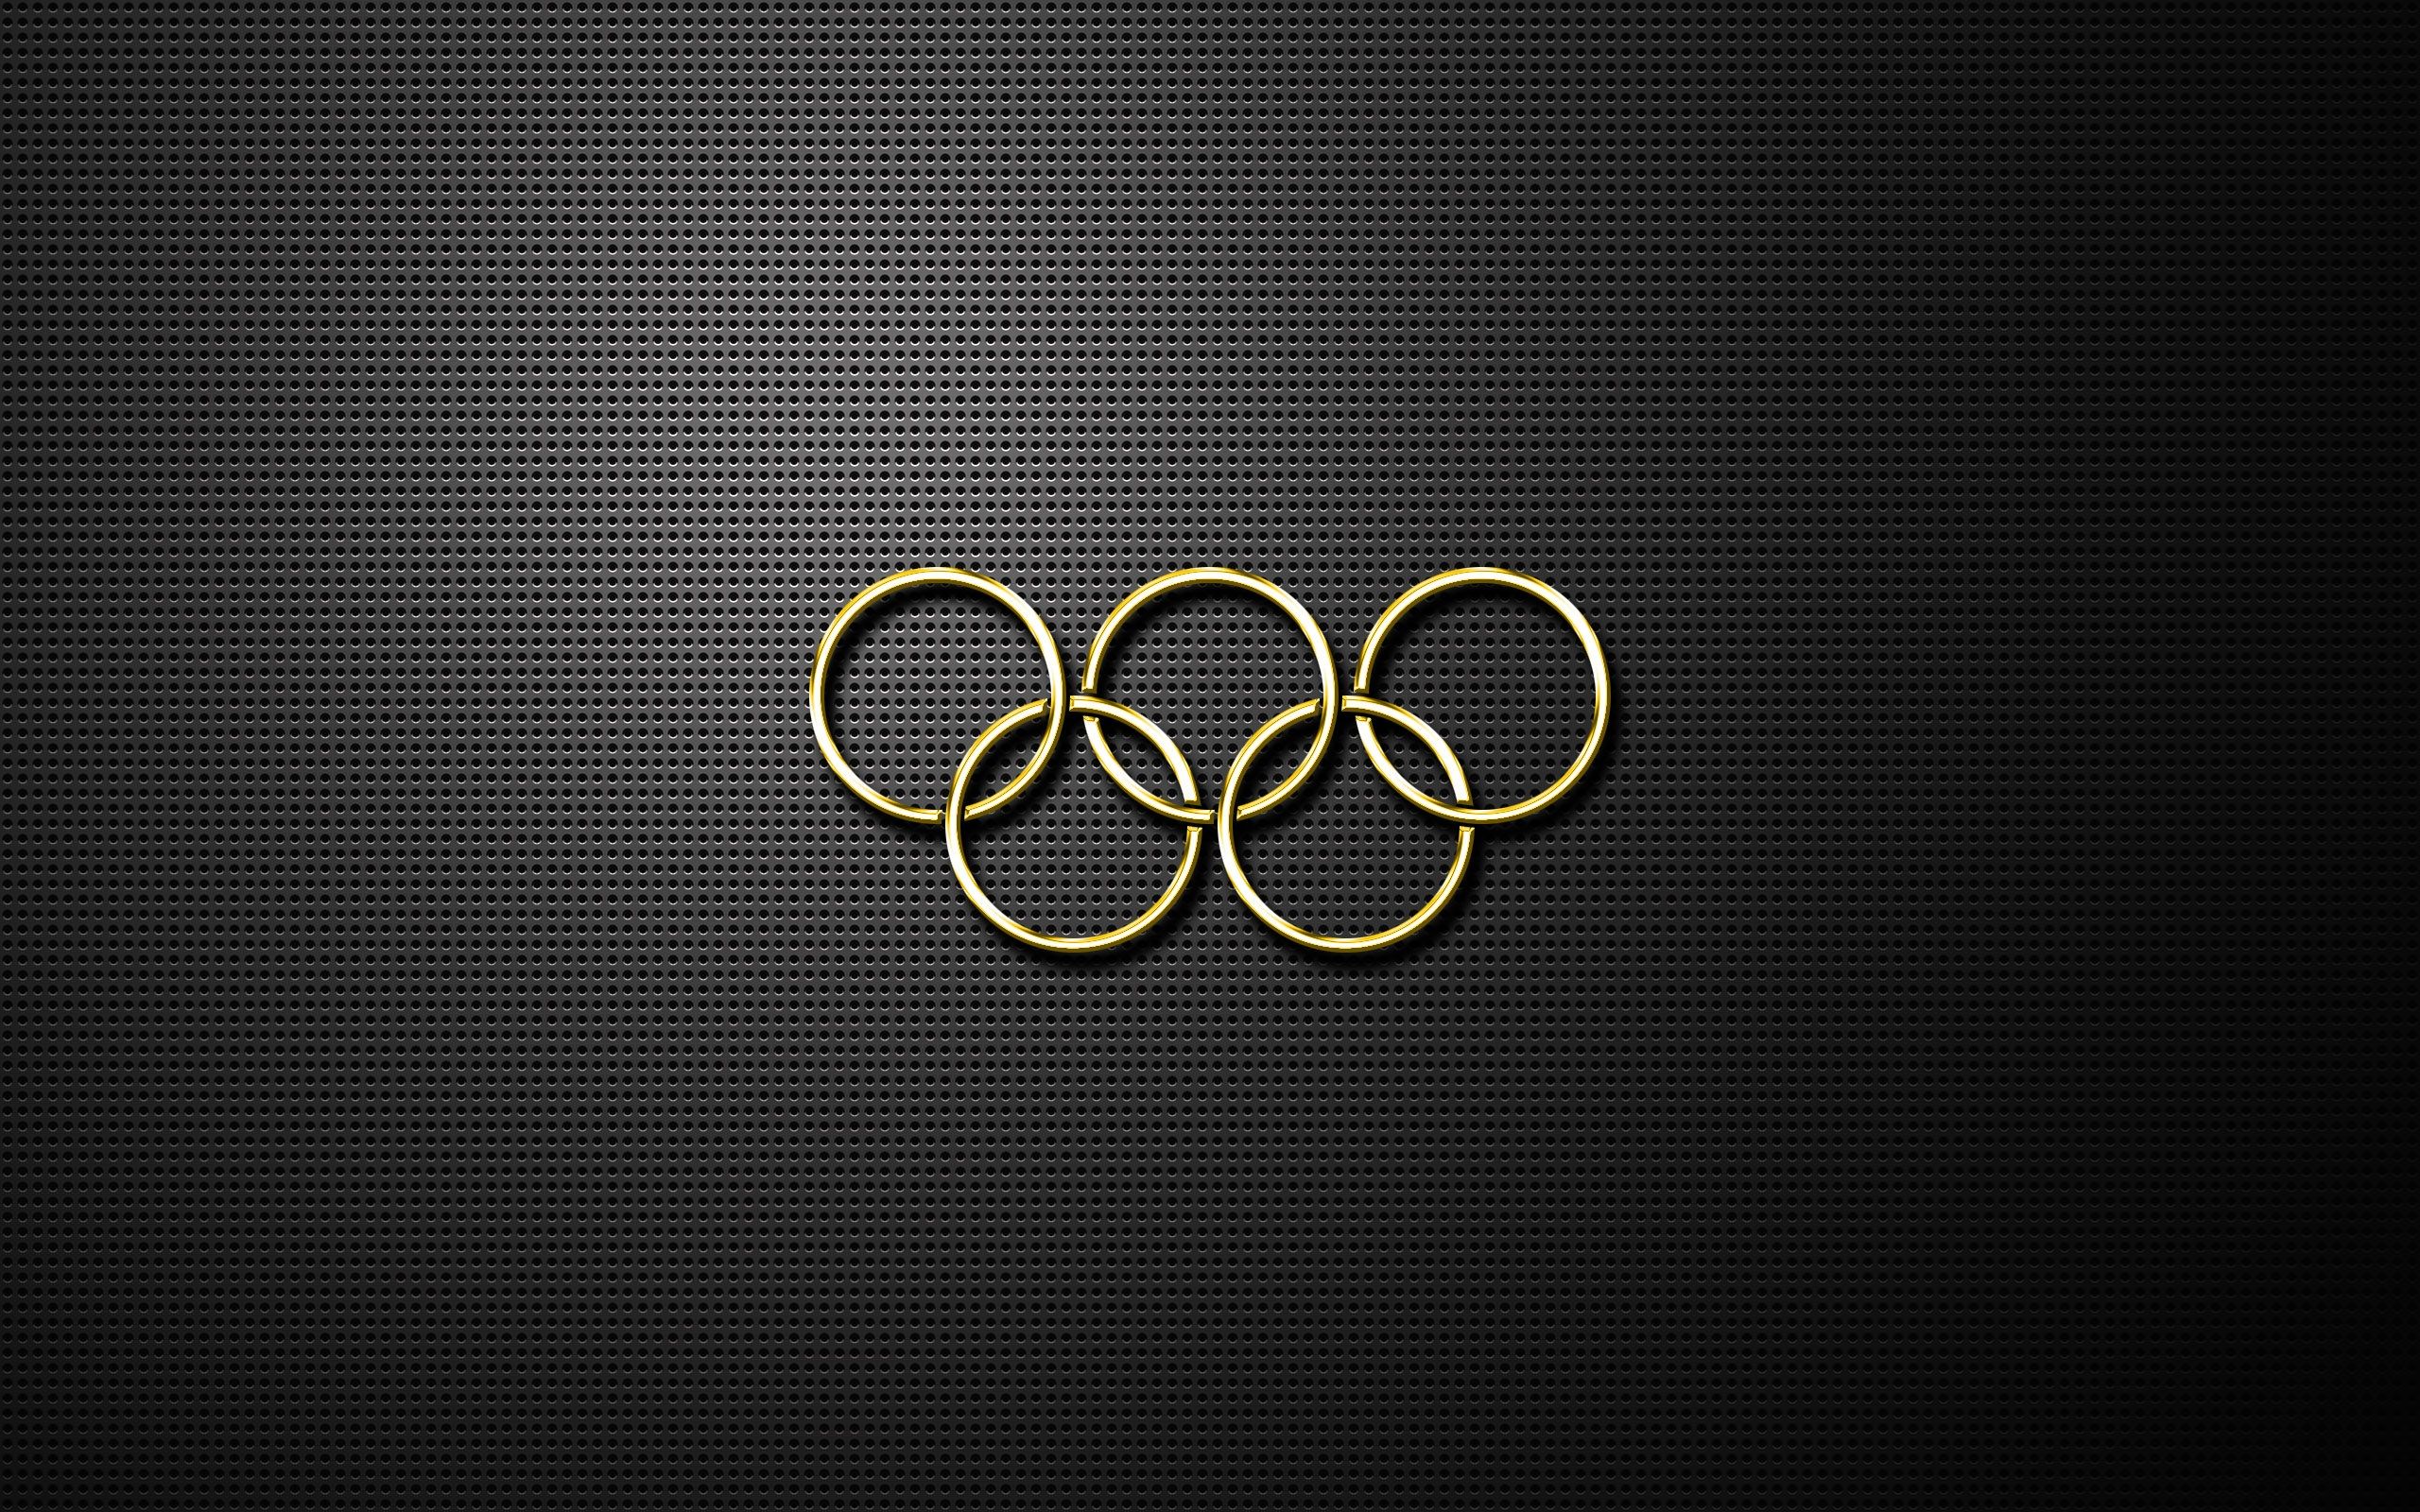 Olympic Wallpaper, Olympic Photo for Windows and Mac Systems